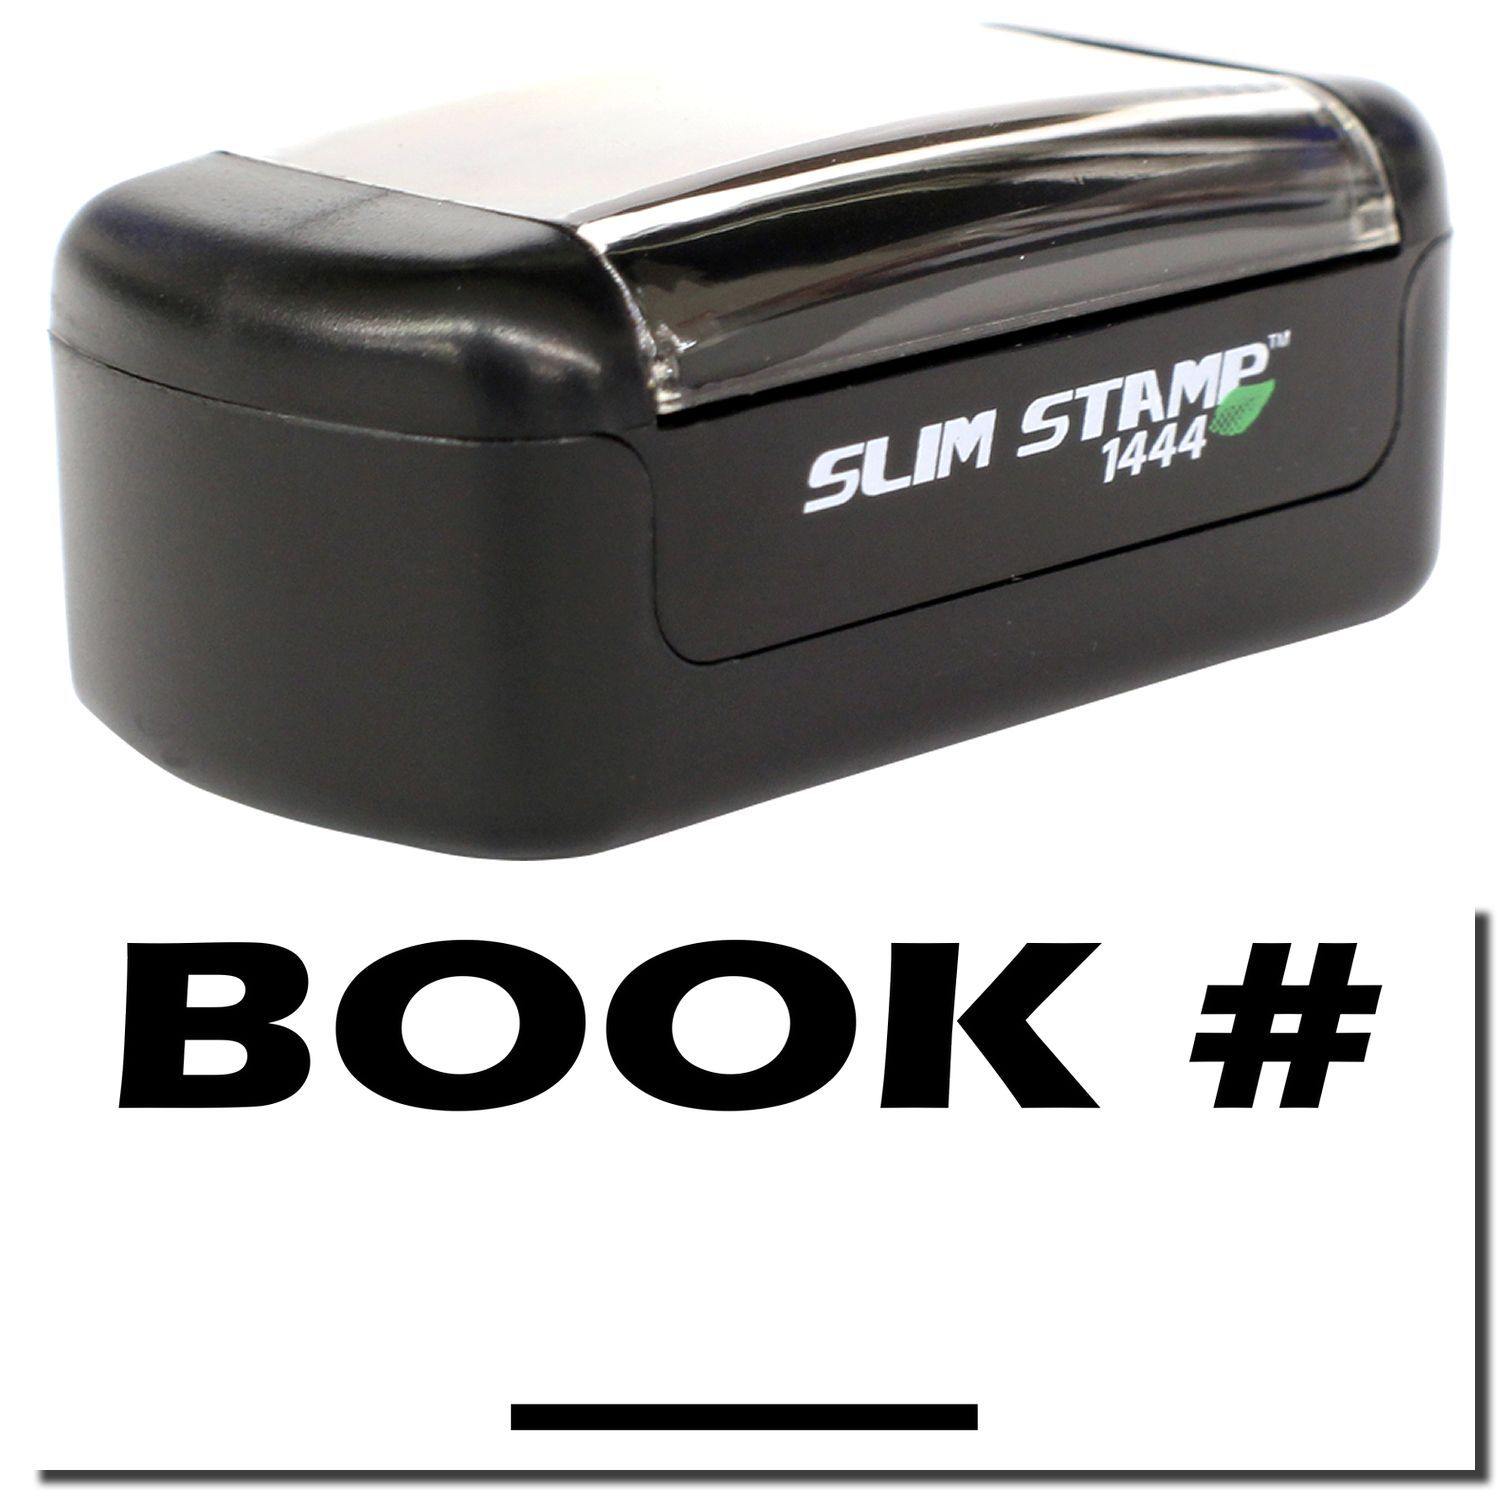 A stock office pre-inked stamp with a stamped image showing how the text "BOOK" with a hashtag sign (#) and a line under the text is displayed after stamping.